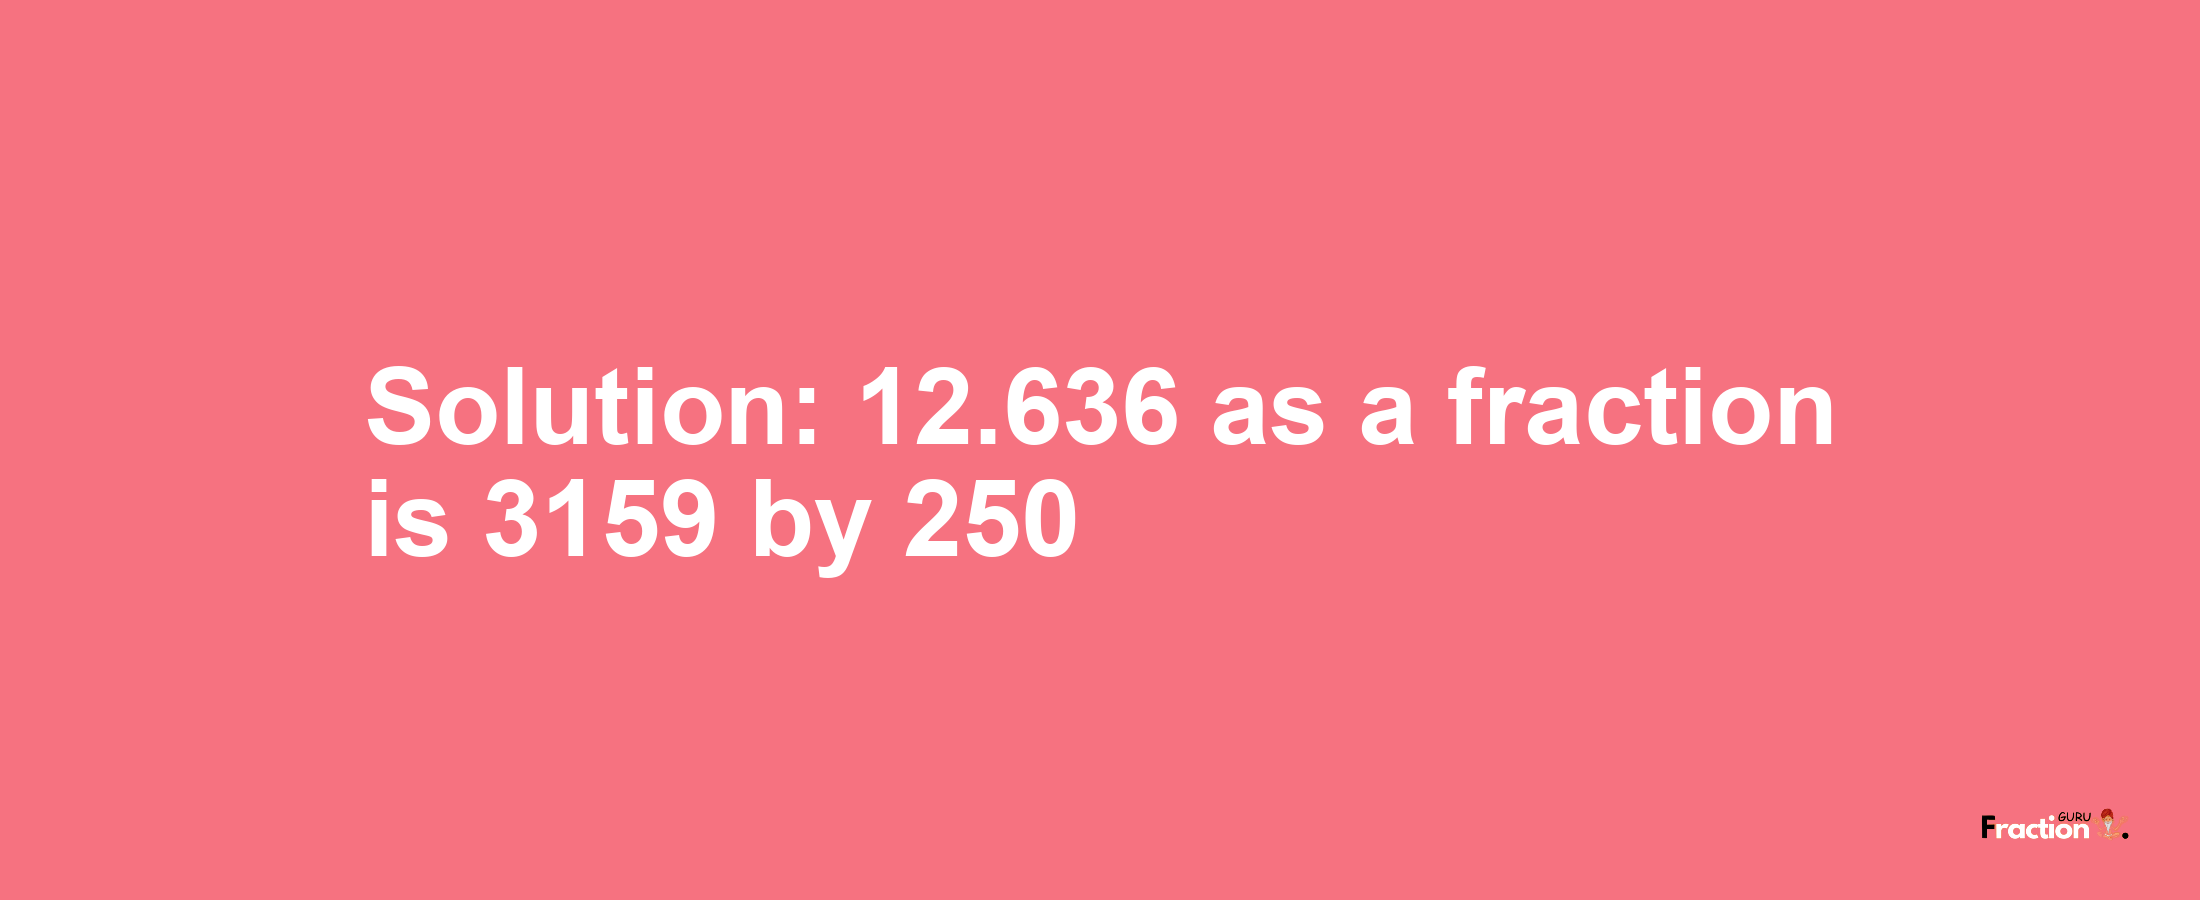 Solution:12.636 as a fraction is 3159/250